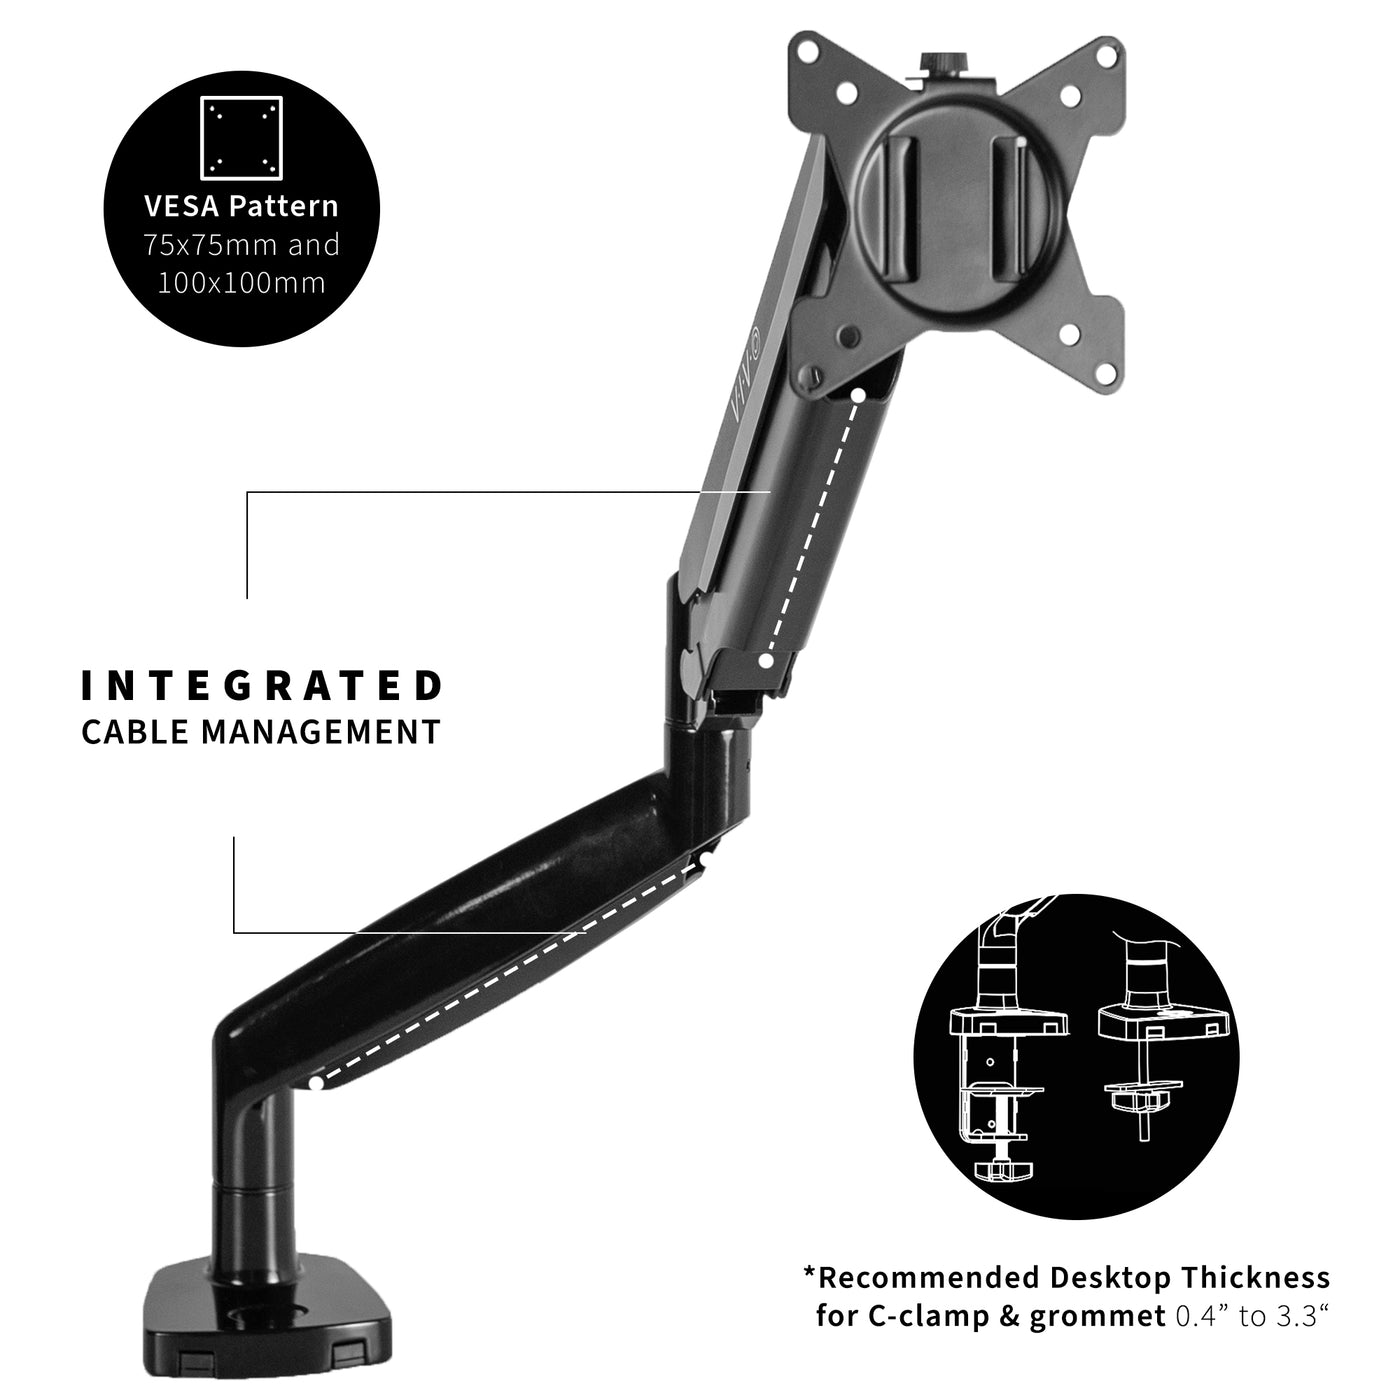 VIVO Premium Aluminum Heavy Duty Single Monitor Arm for Ultrawide Monitor up to 35 inches and 30.9 lbs